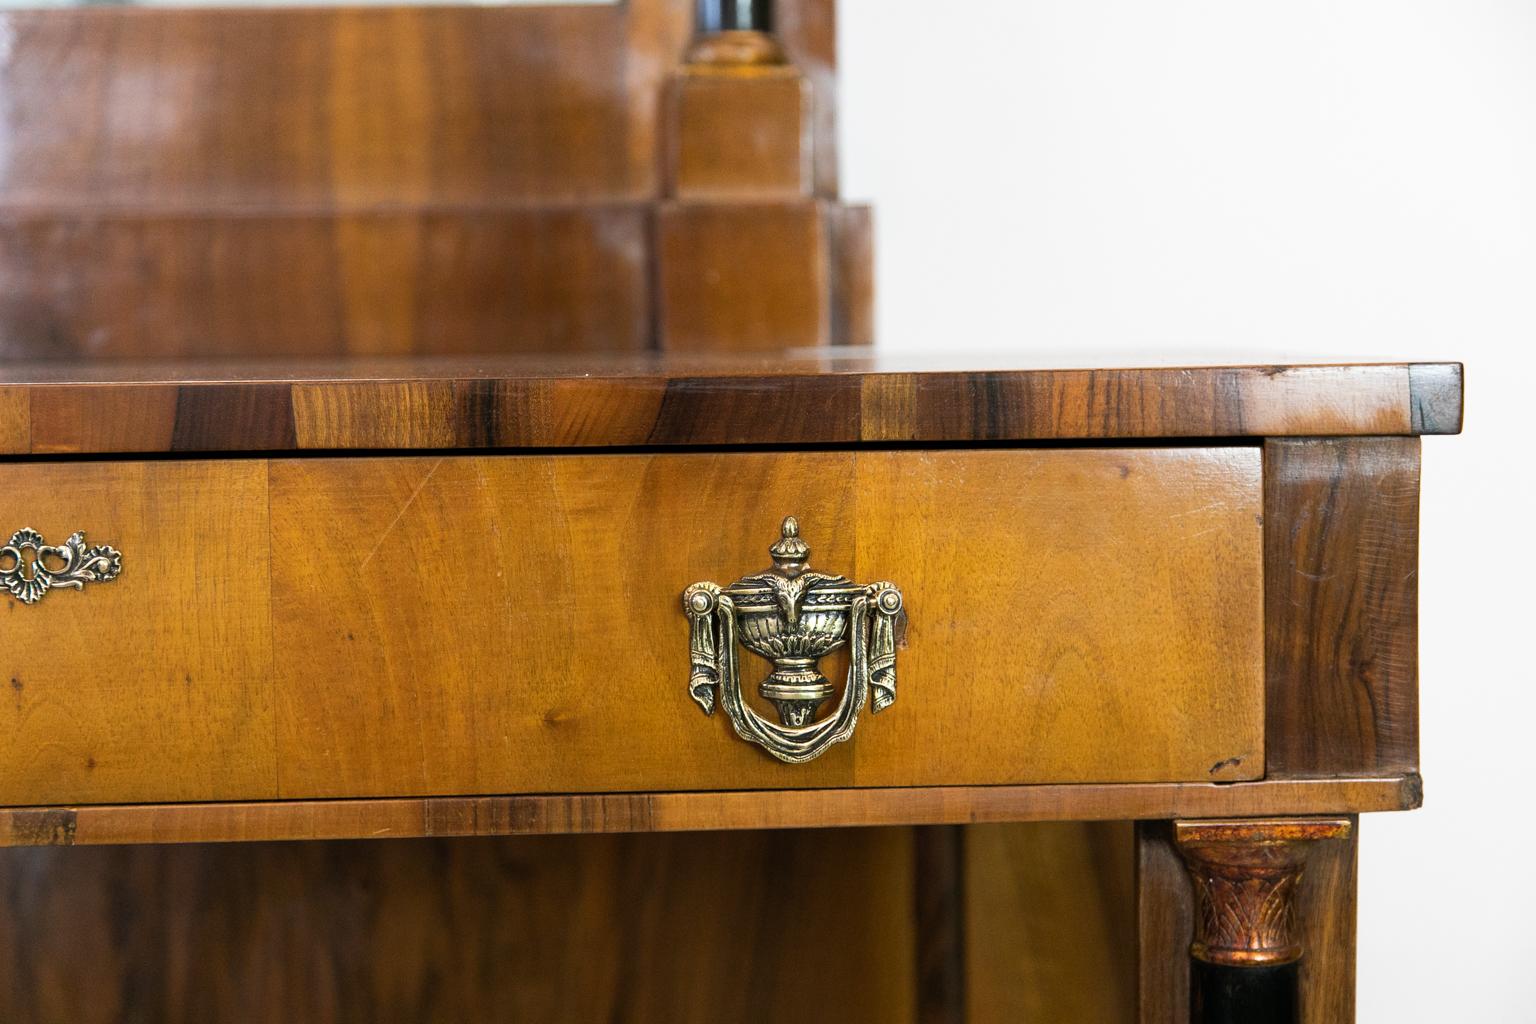 The top of this English William IV console table has the original finish and patina. The frieze has a medallion and leaf spear carved in high relief. The front legs have a scrolled shape with stylized acanthus leaves on the top and bottom which are